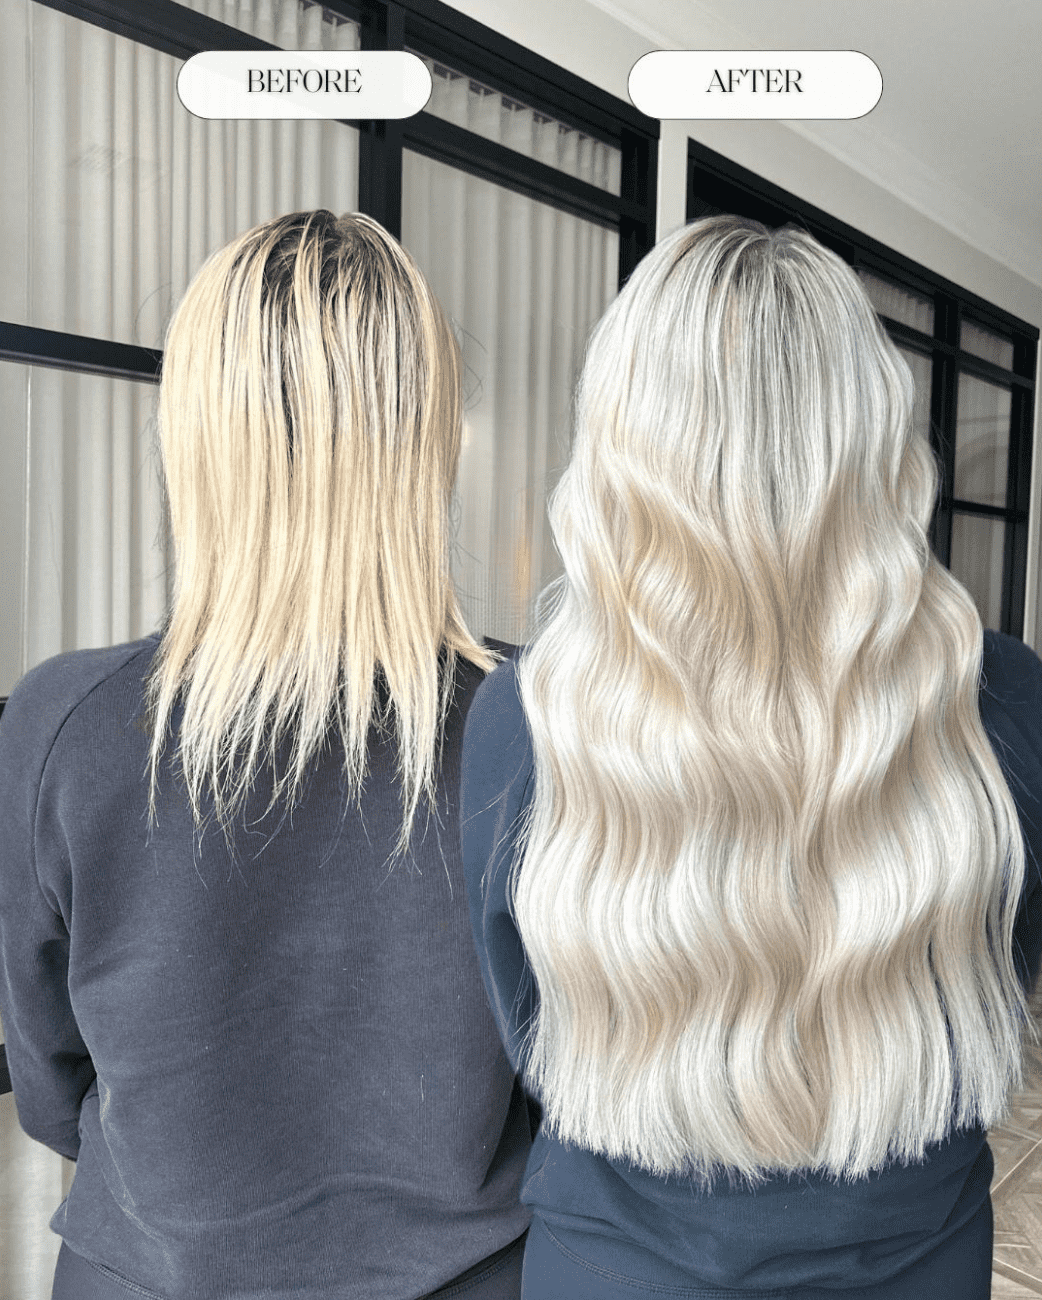 hair extensions adelaide, hair extensions perth, hair extensions brisbane, hair extensions queensland, hair extensions canberra, hair extensions australia, the bestv hair extensions, hair extensions for damaged hair, weft hair bextensions, tips for hair health, hair growth, hair growth suppliment, hair growth tips, hair health